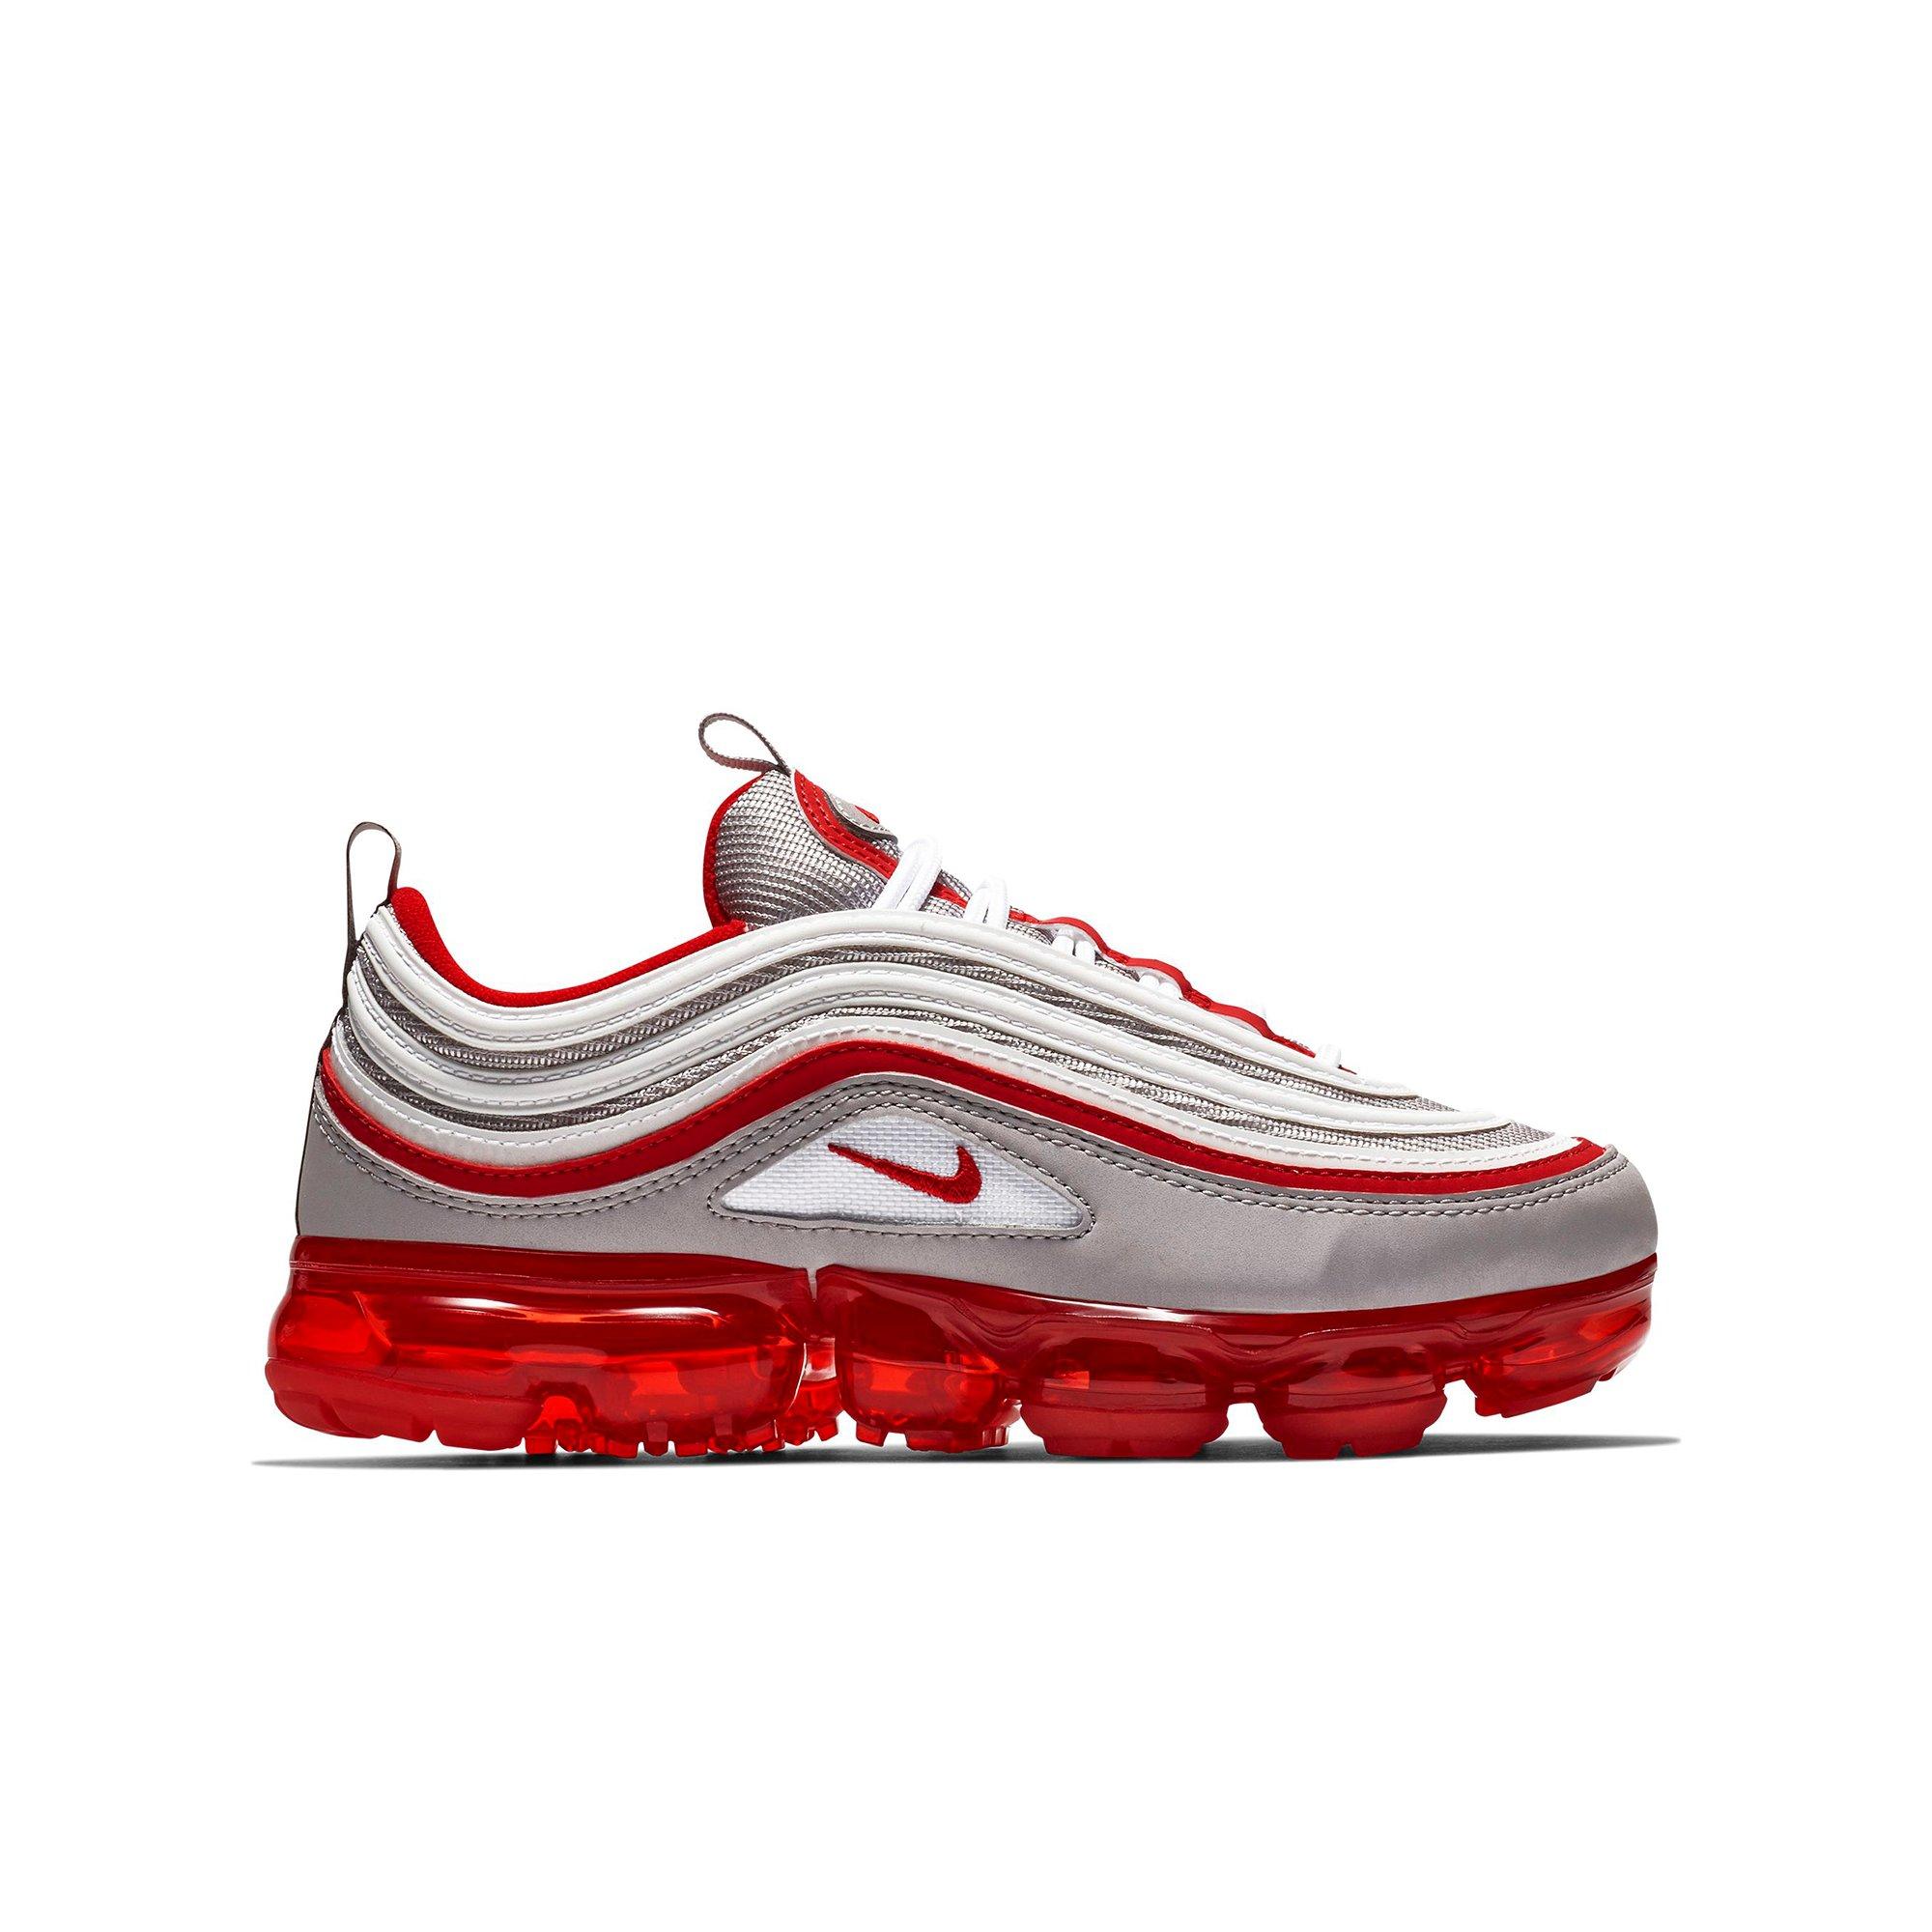 NIKE AIR VAPORMAX 97 SILVER BULLET in Walsall for